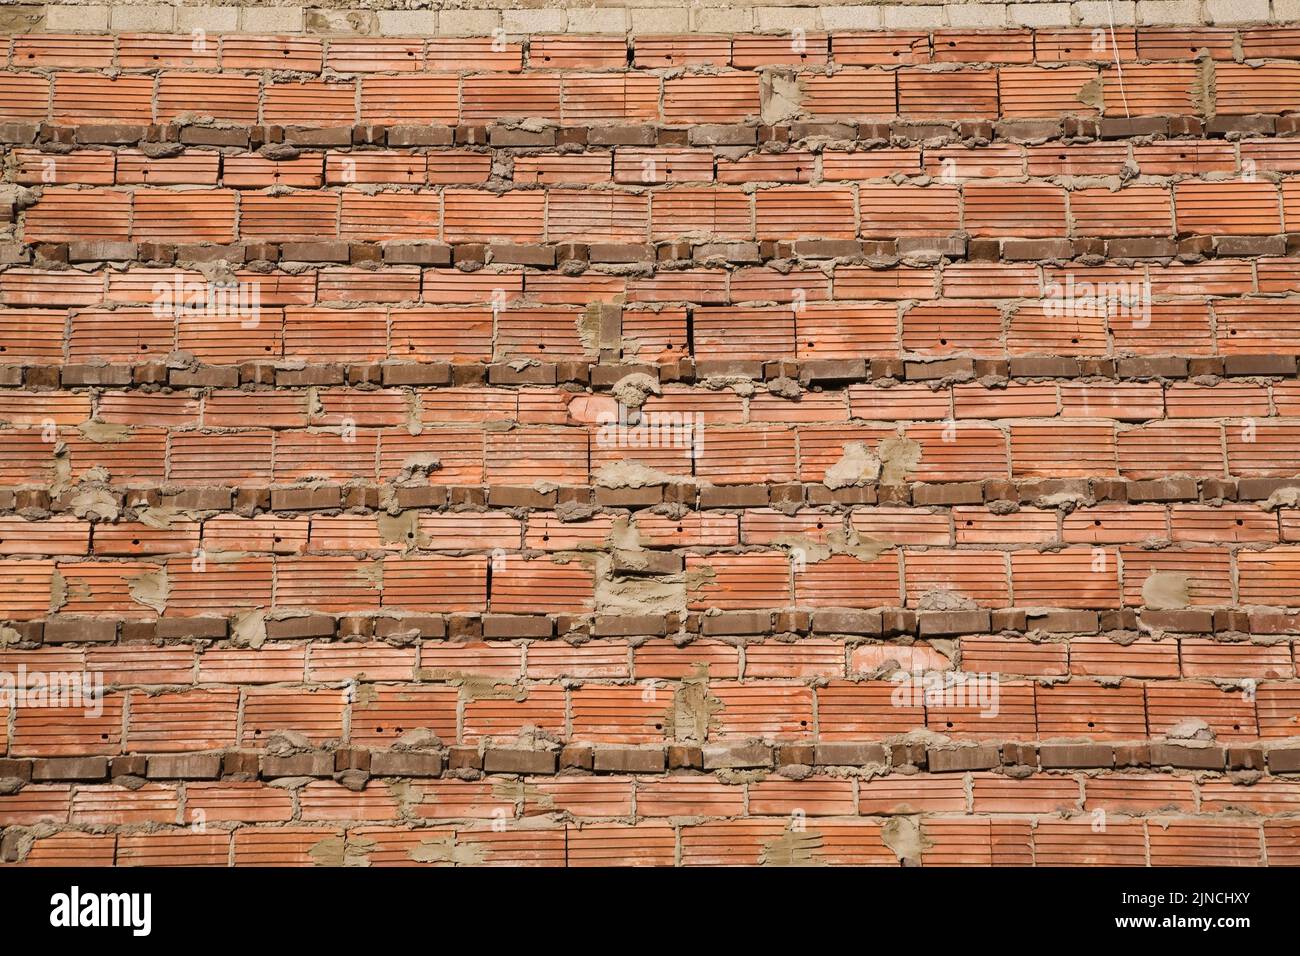 Close-up of red brick wall with exposed cement mortar joints, Quebec, Canada Stock Photo